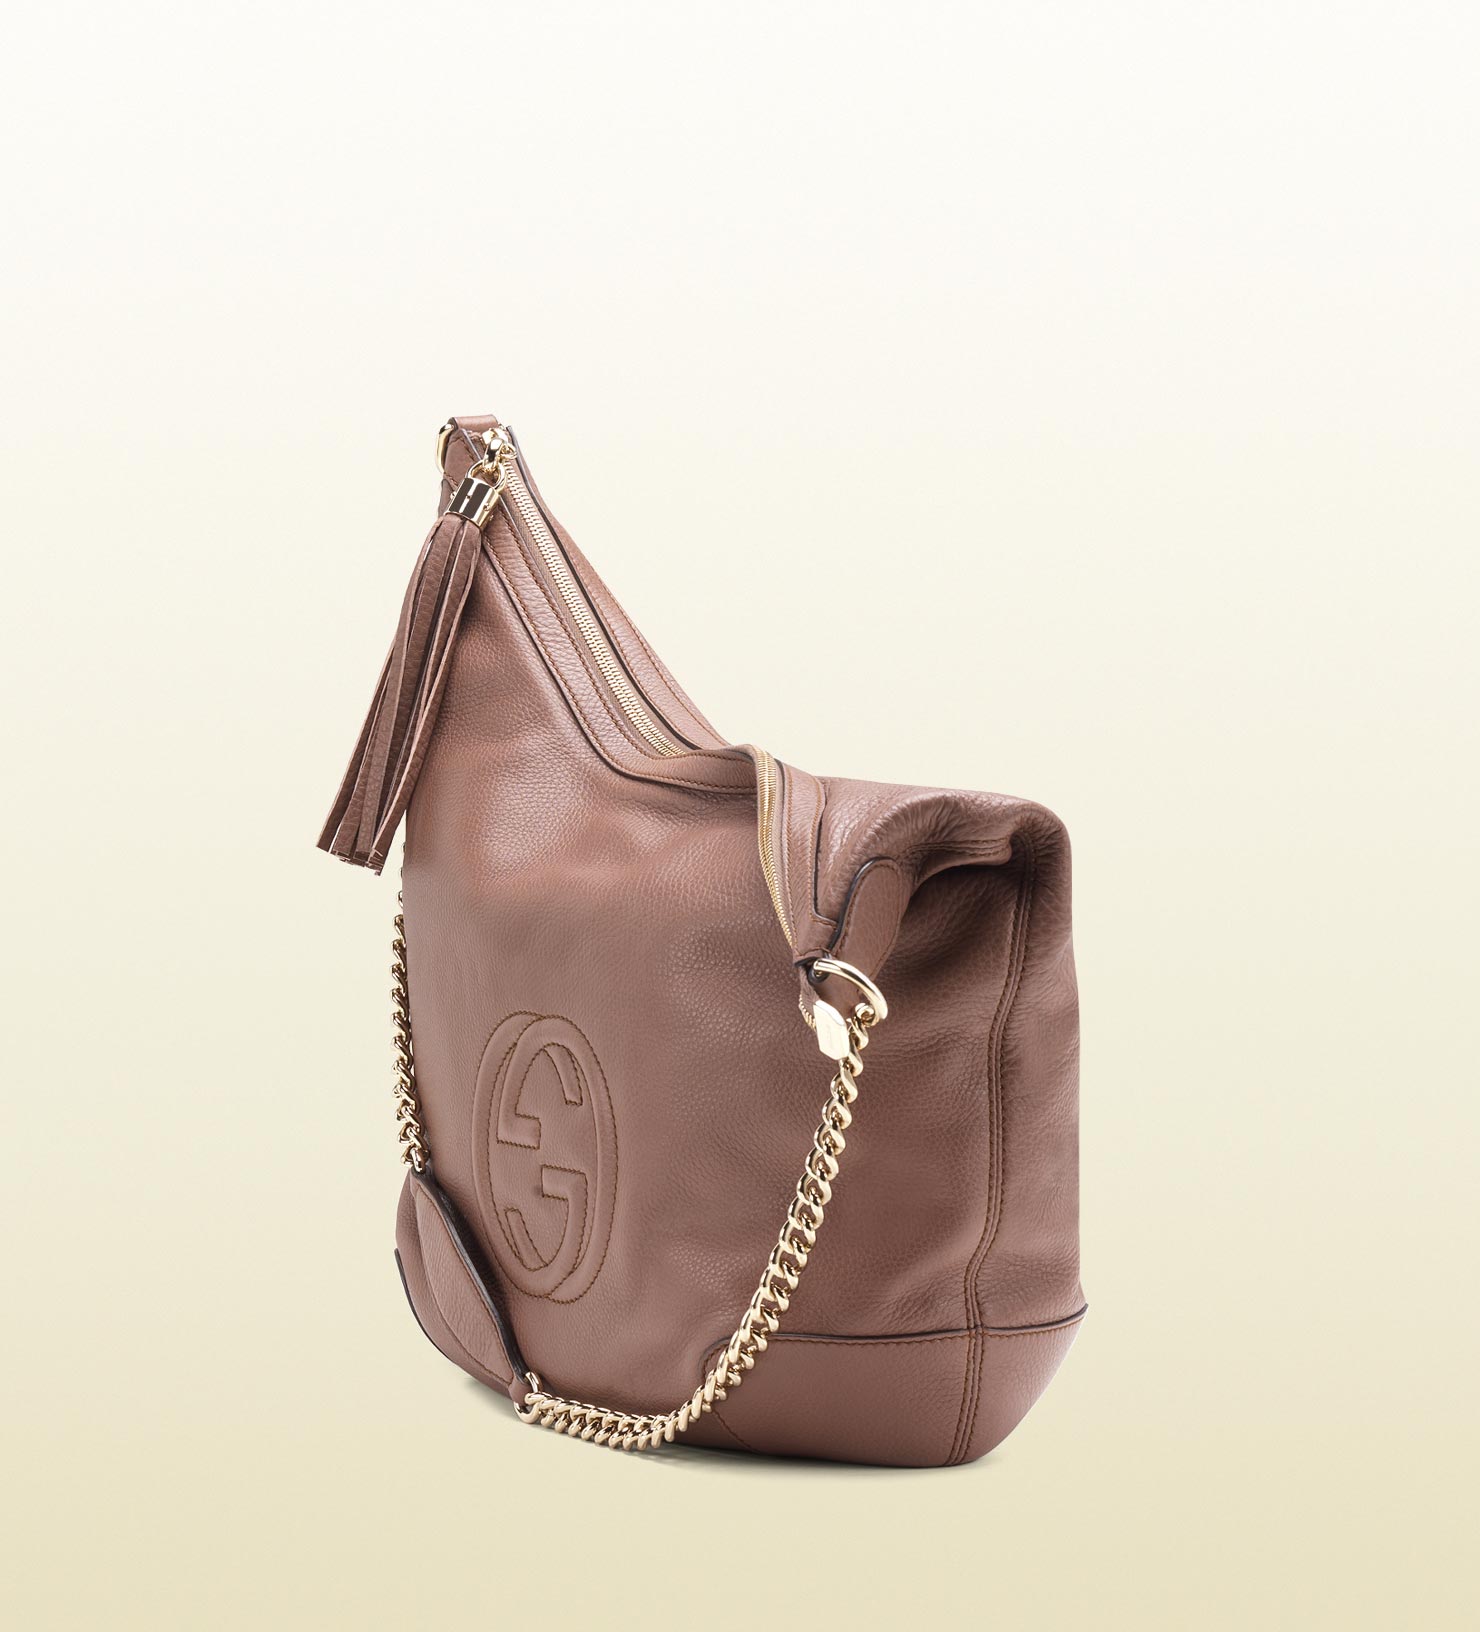 Lyst - Gucci Soho Pink Tan Leather Shoulder Bag with Chain Strap in Pink